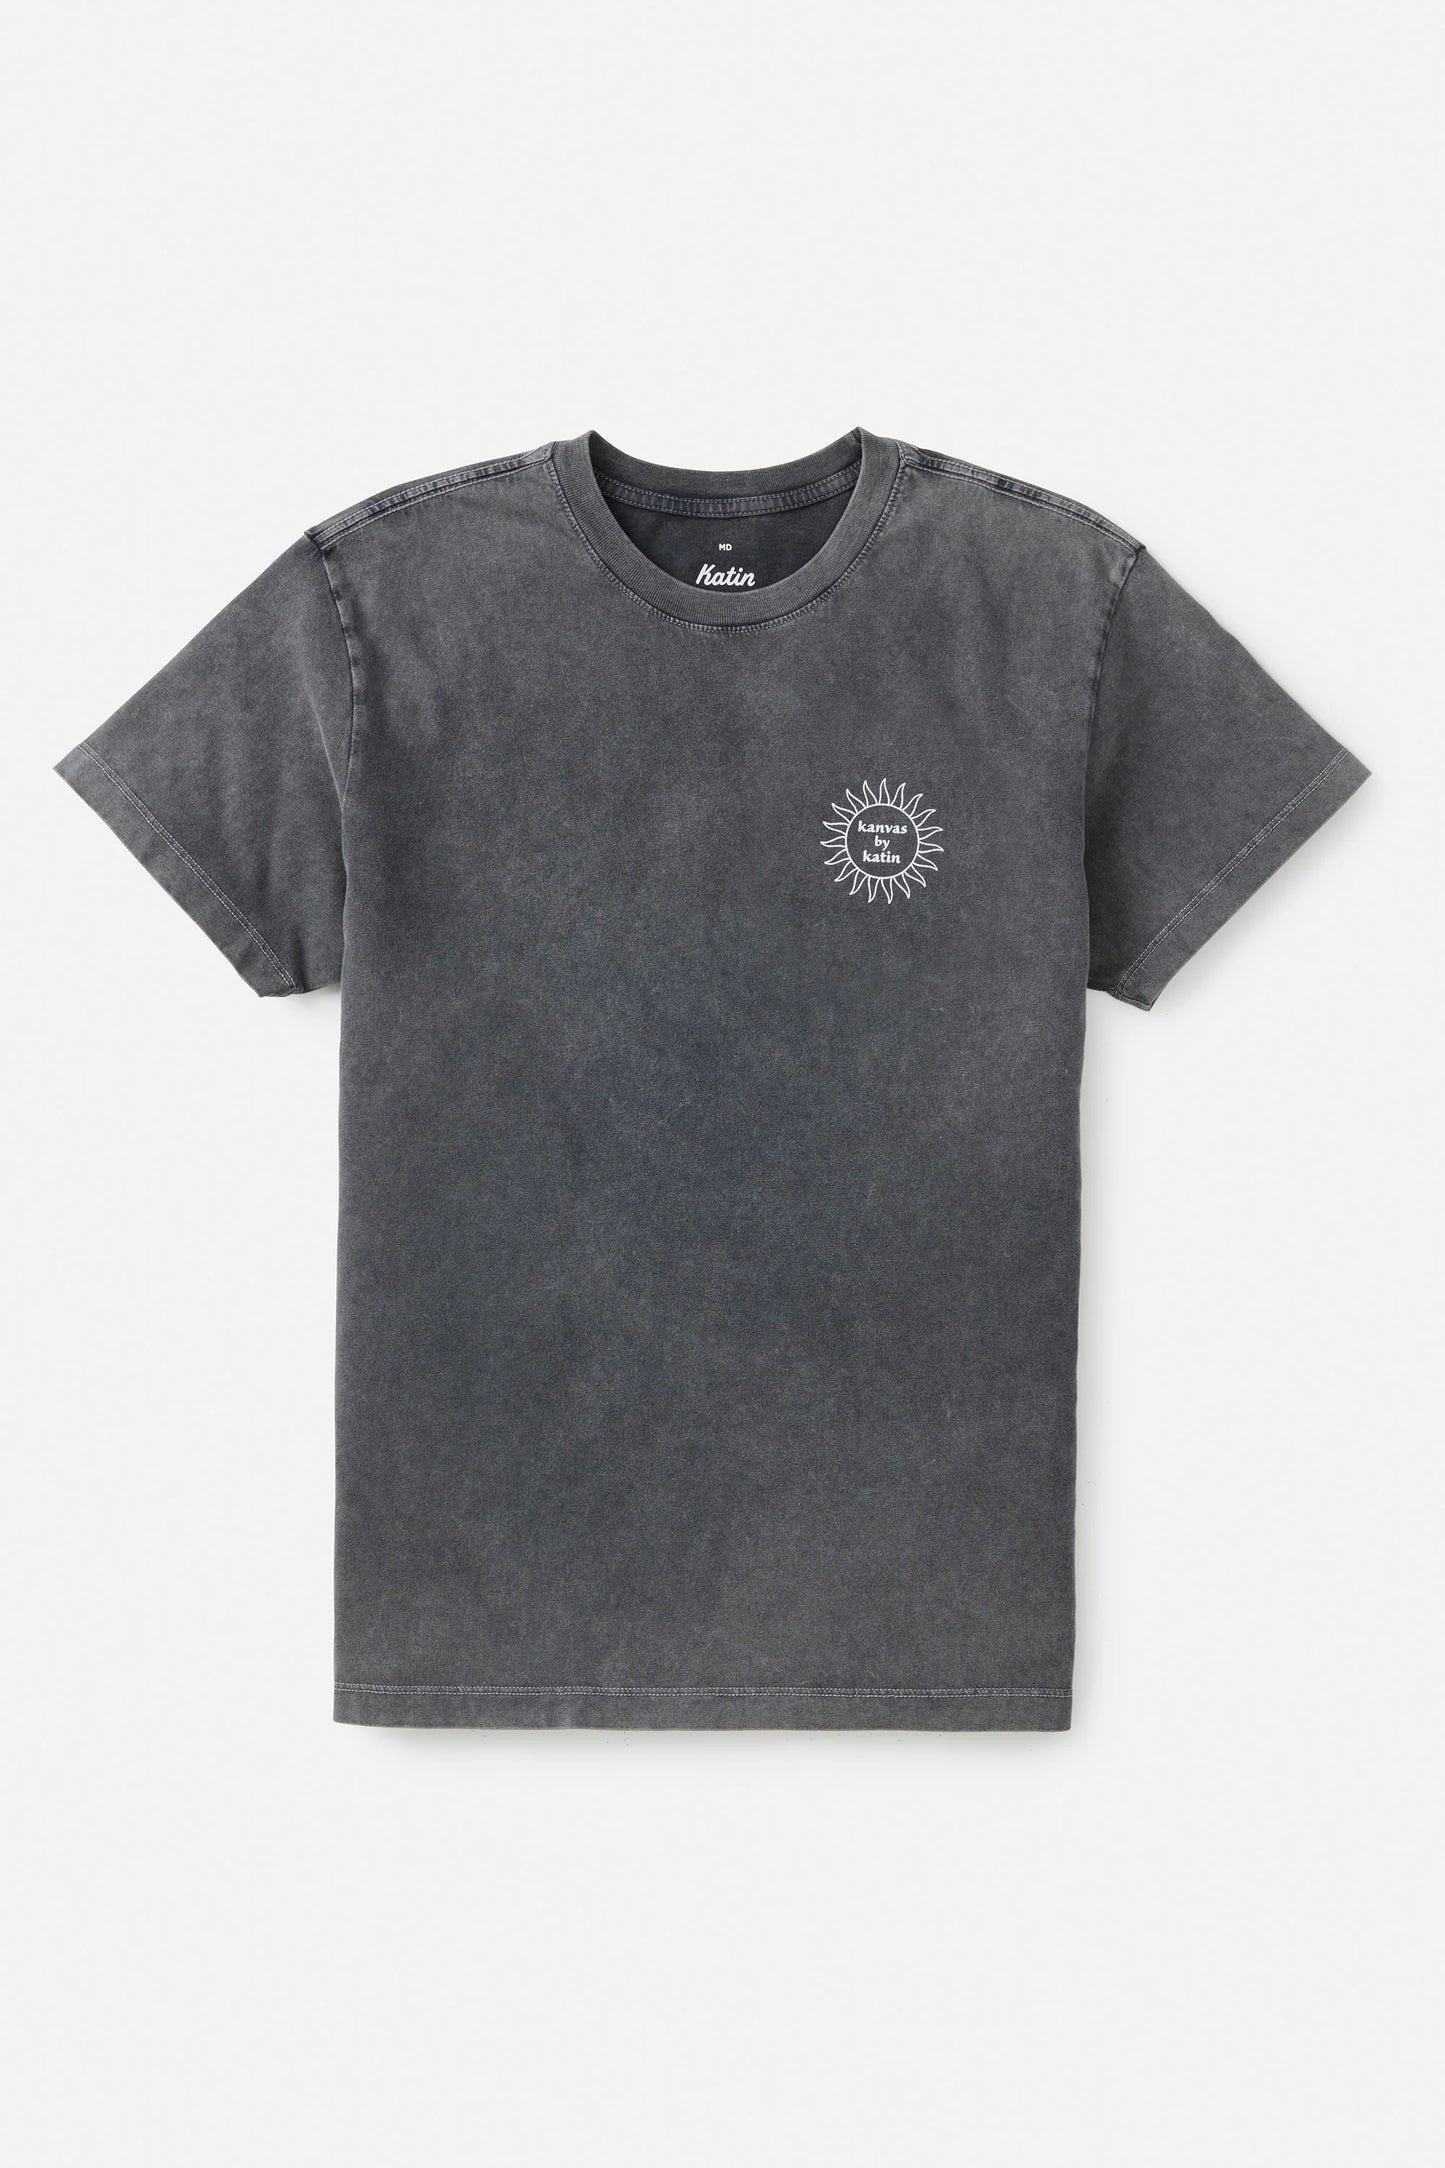 Katin M SS Scortch Tee BLACK SAND WASHED